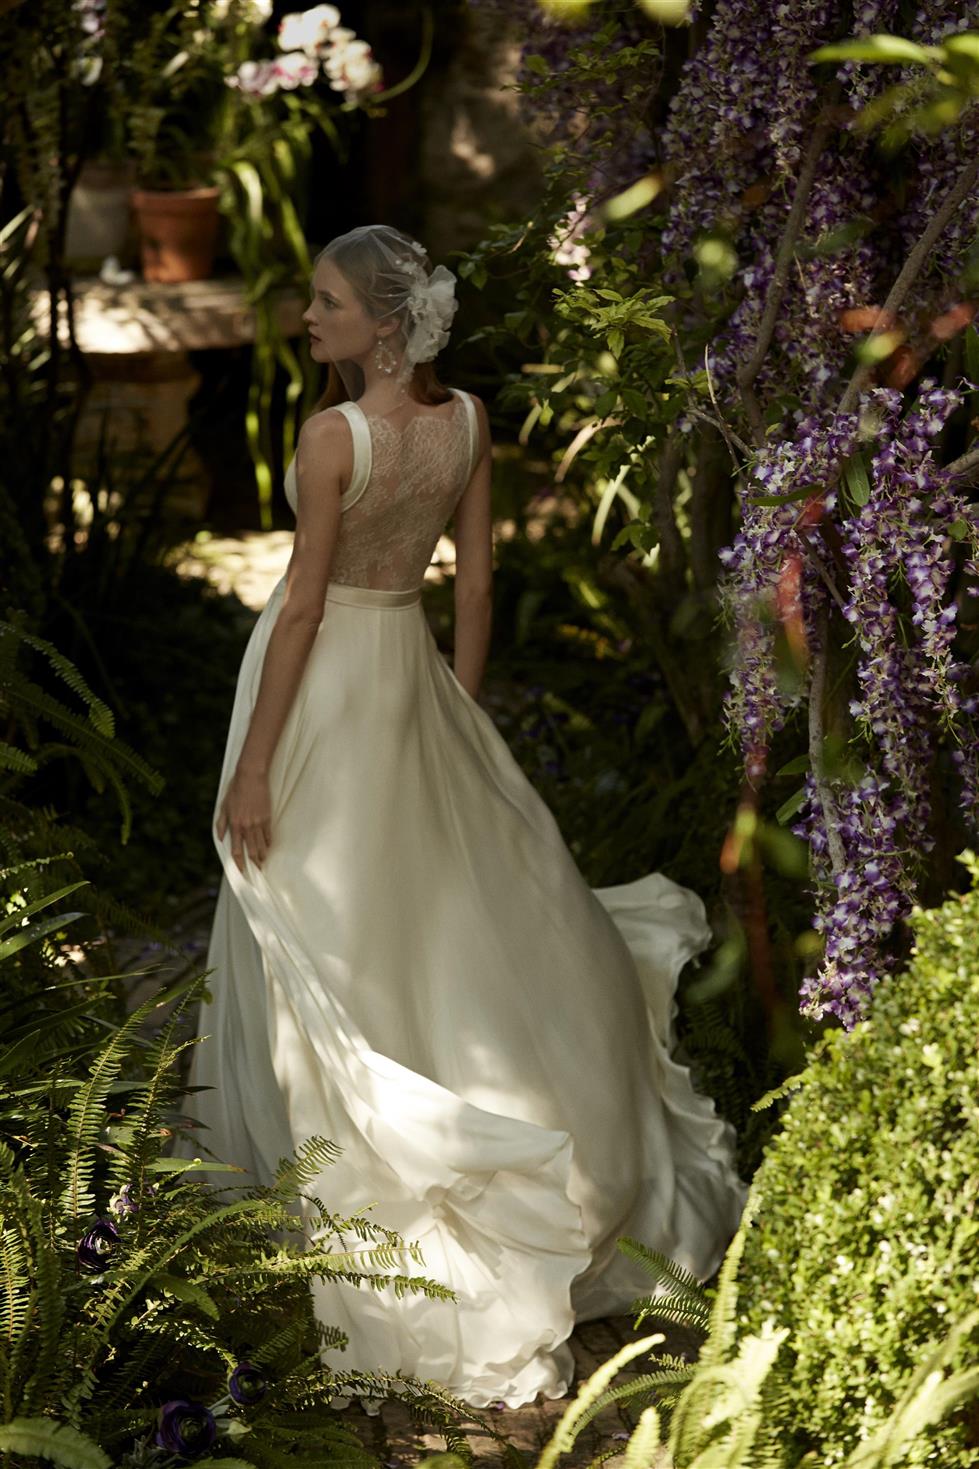 Angel Wedding Dress from BHLDN's Spring 2015 Bridal Collection